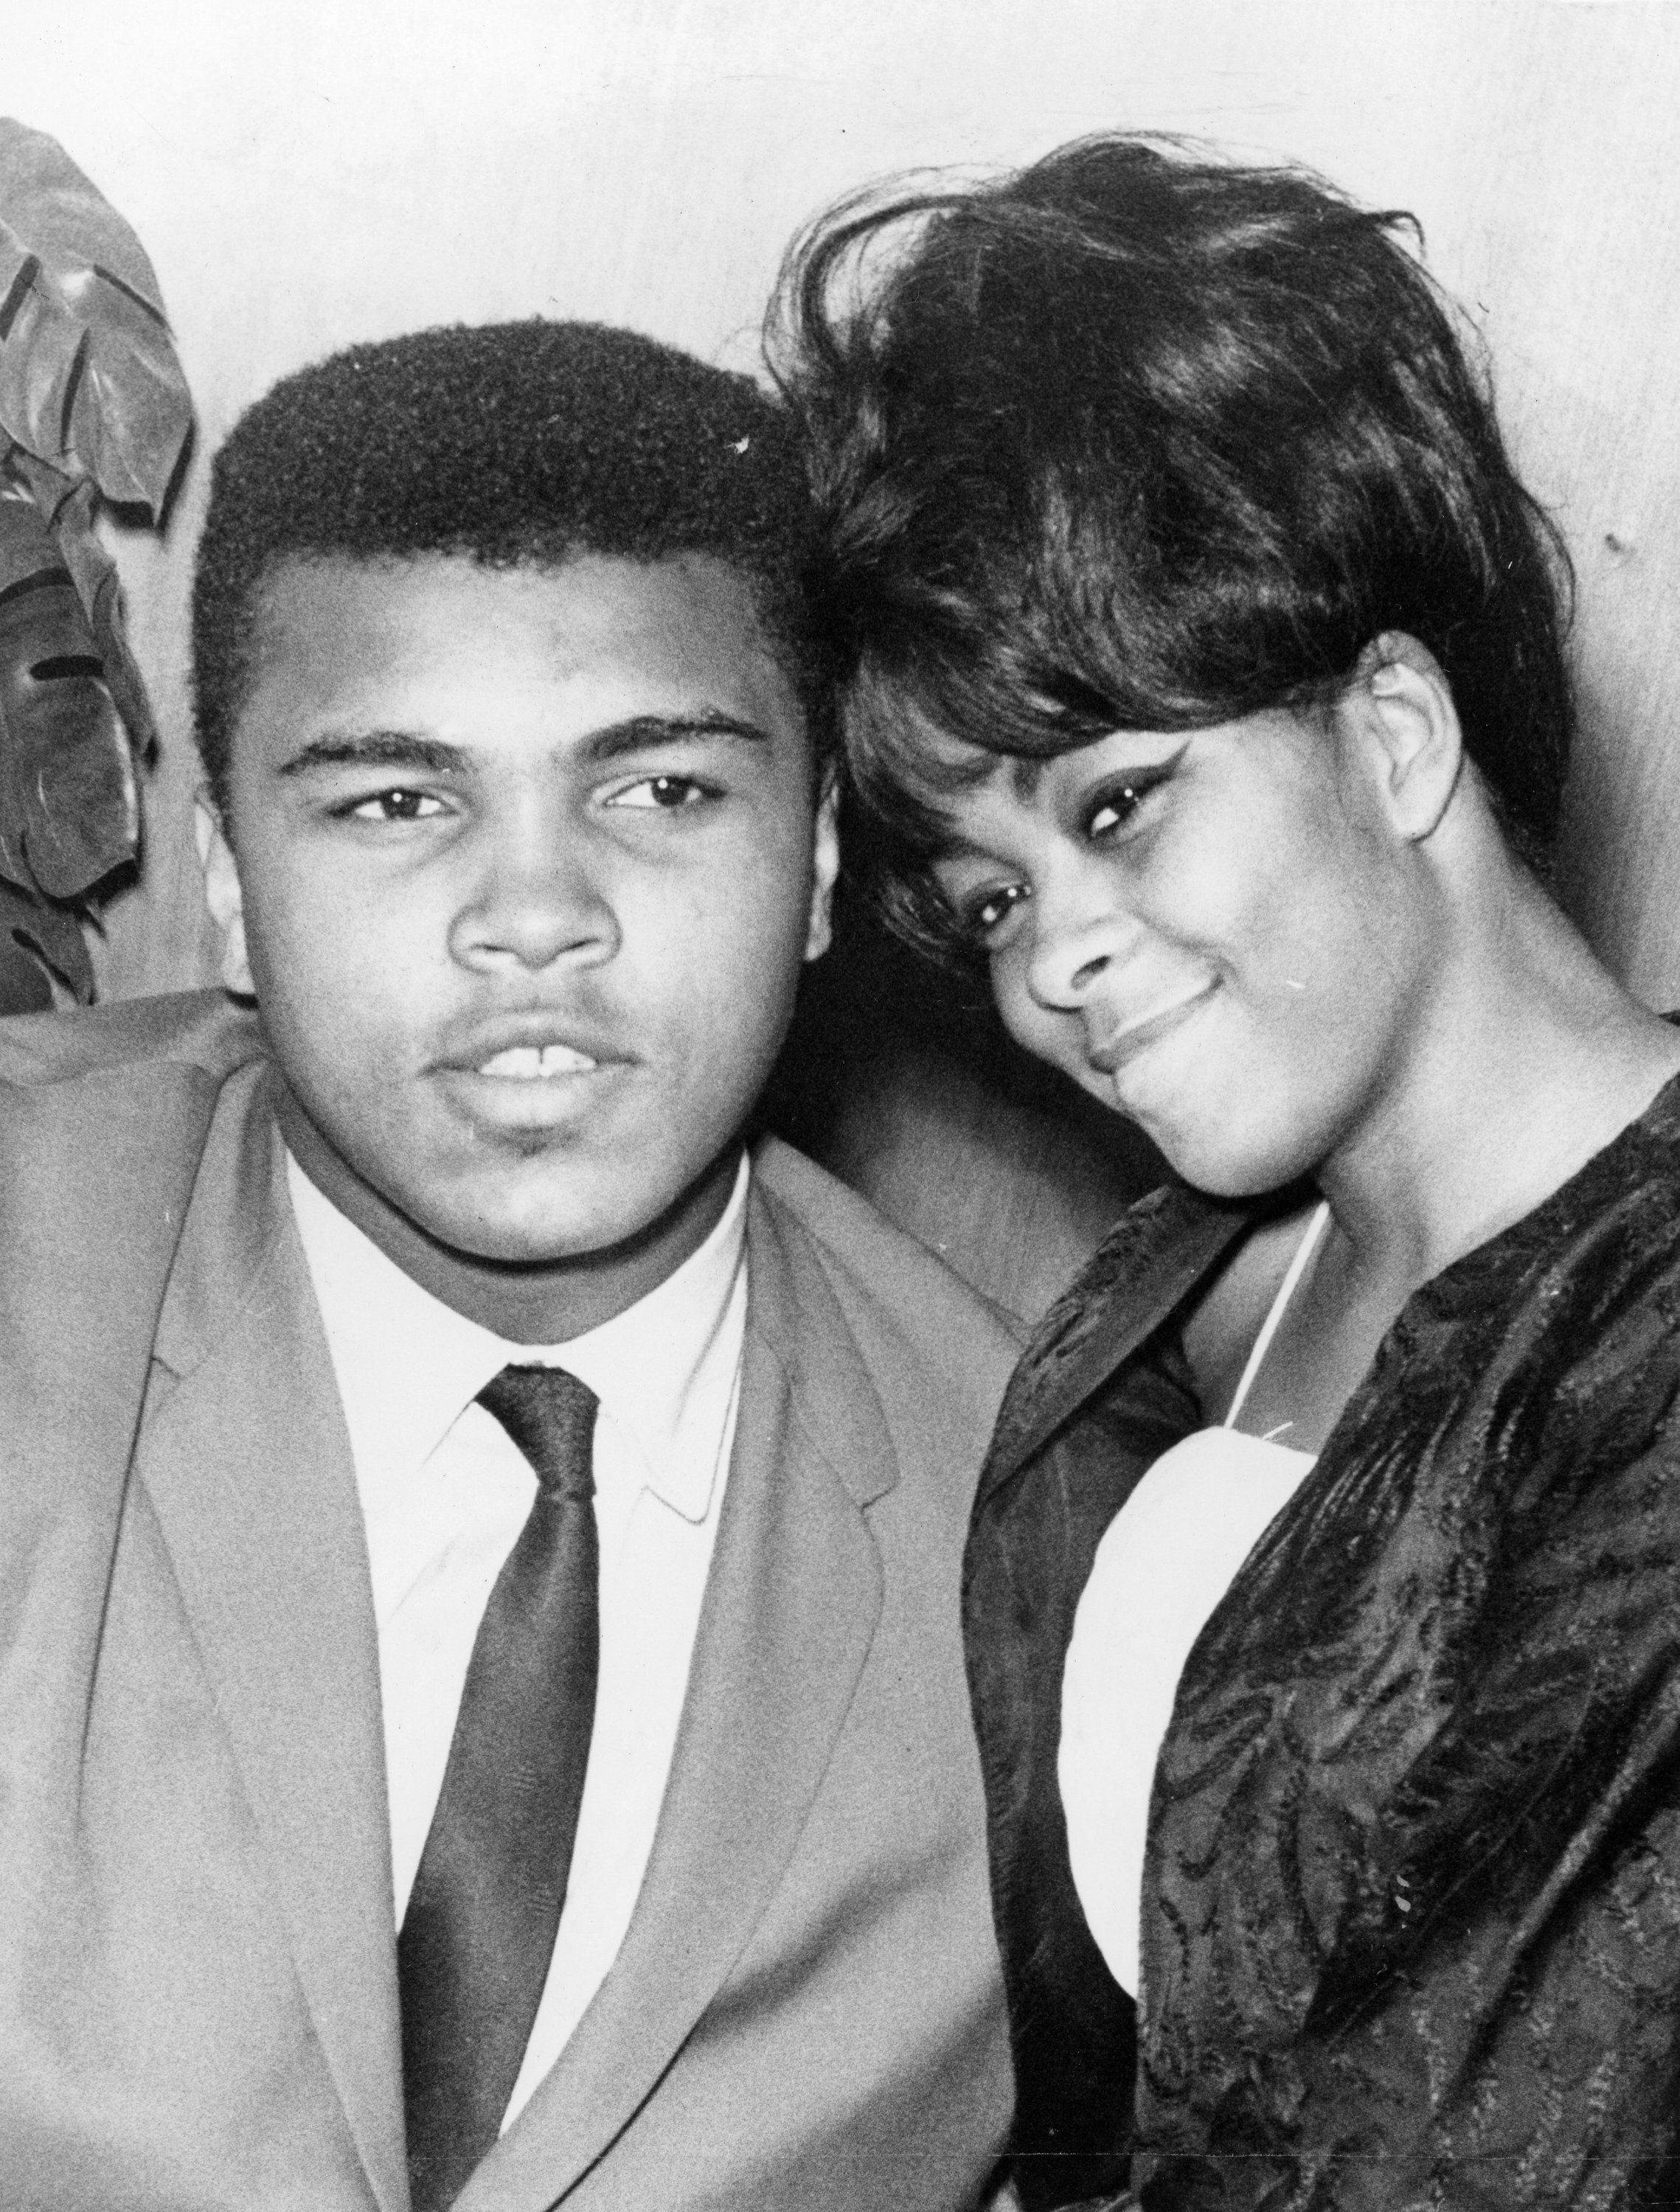 Sonji Roi: All about Muhammad Ali’s First Wife and Their Brief Love Story